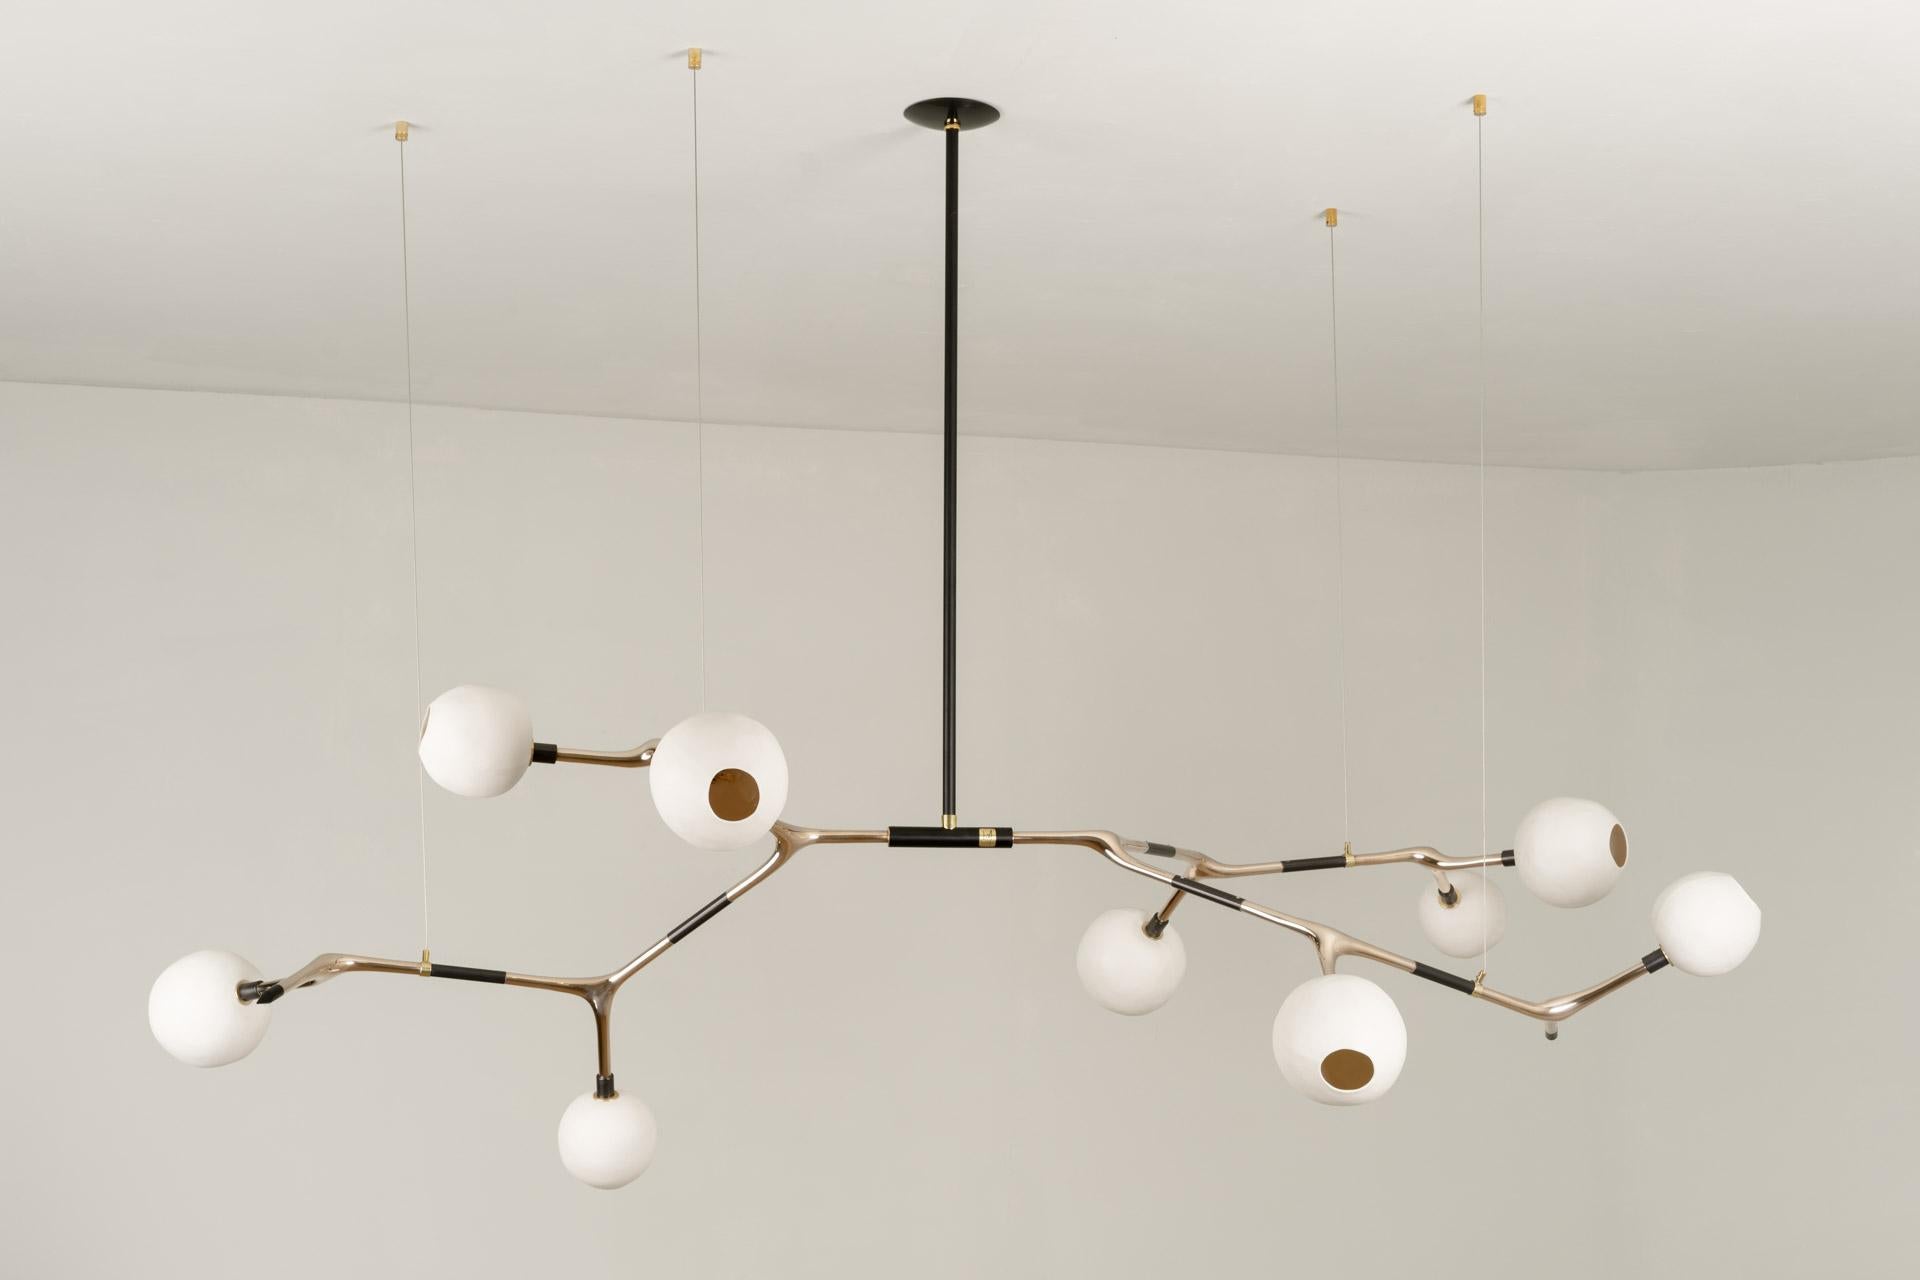 MANTIS 9 pendant light was designed for the Mol collection by Mexican artist Isabel Moncada.

Mantis 9, discreet and elegant with measured dimensions. For a medium and sober table, the Mantis 9 is the key element in a reception area, a living room